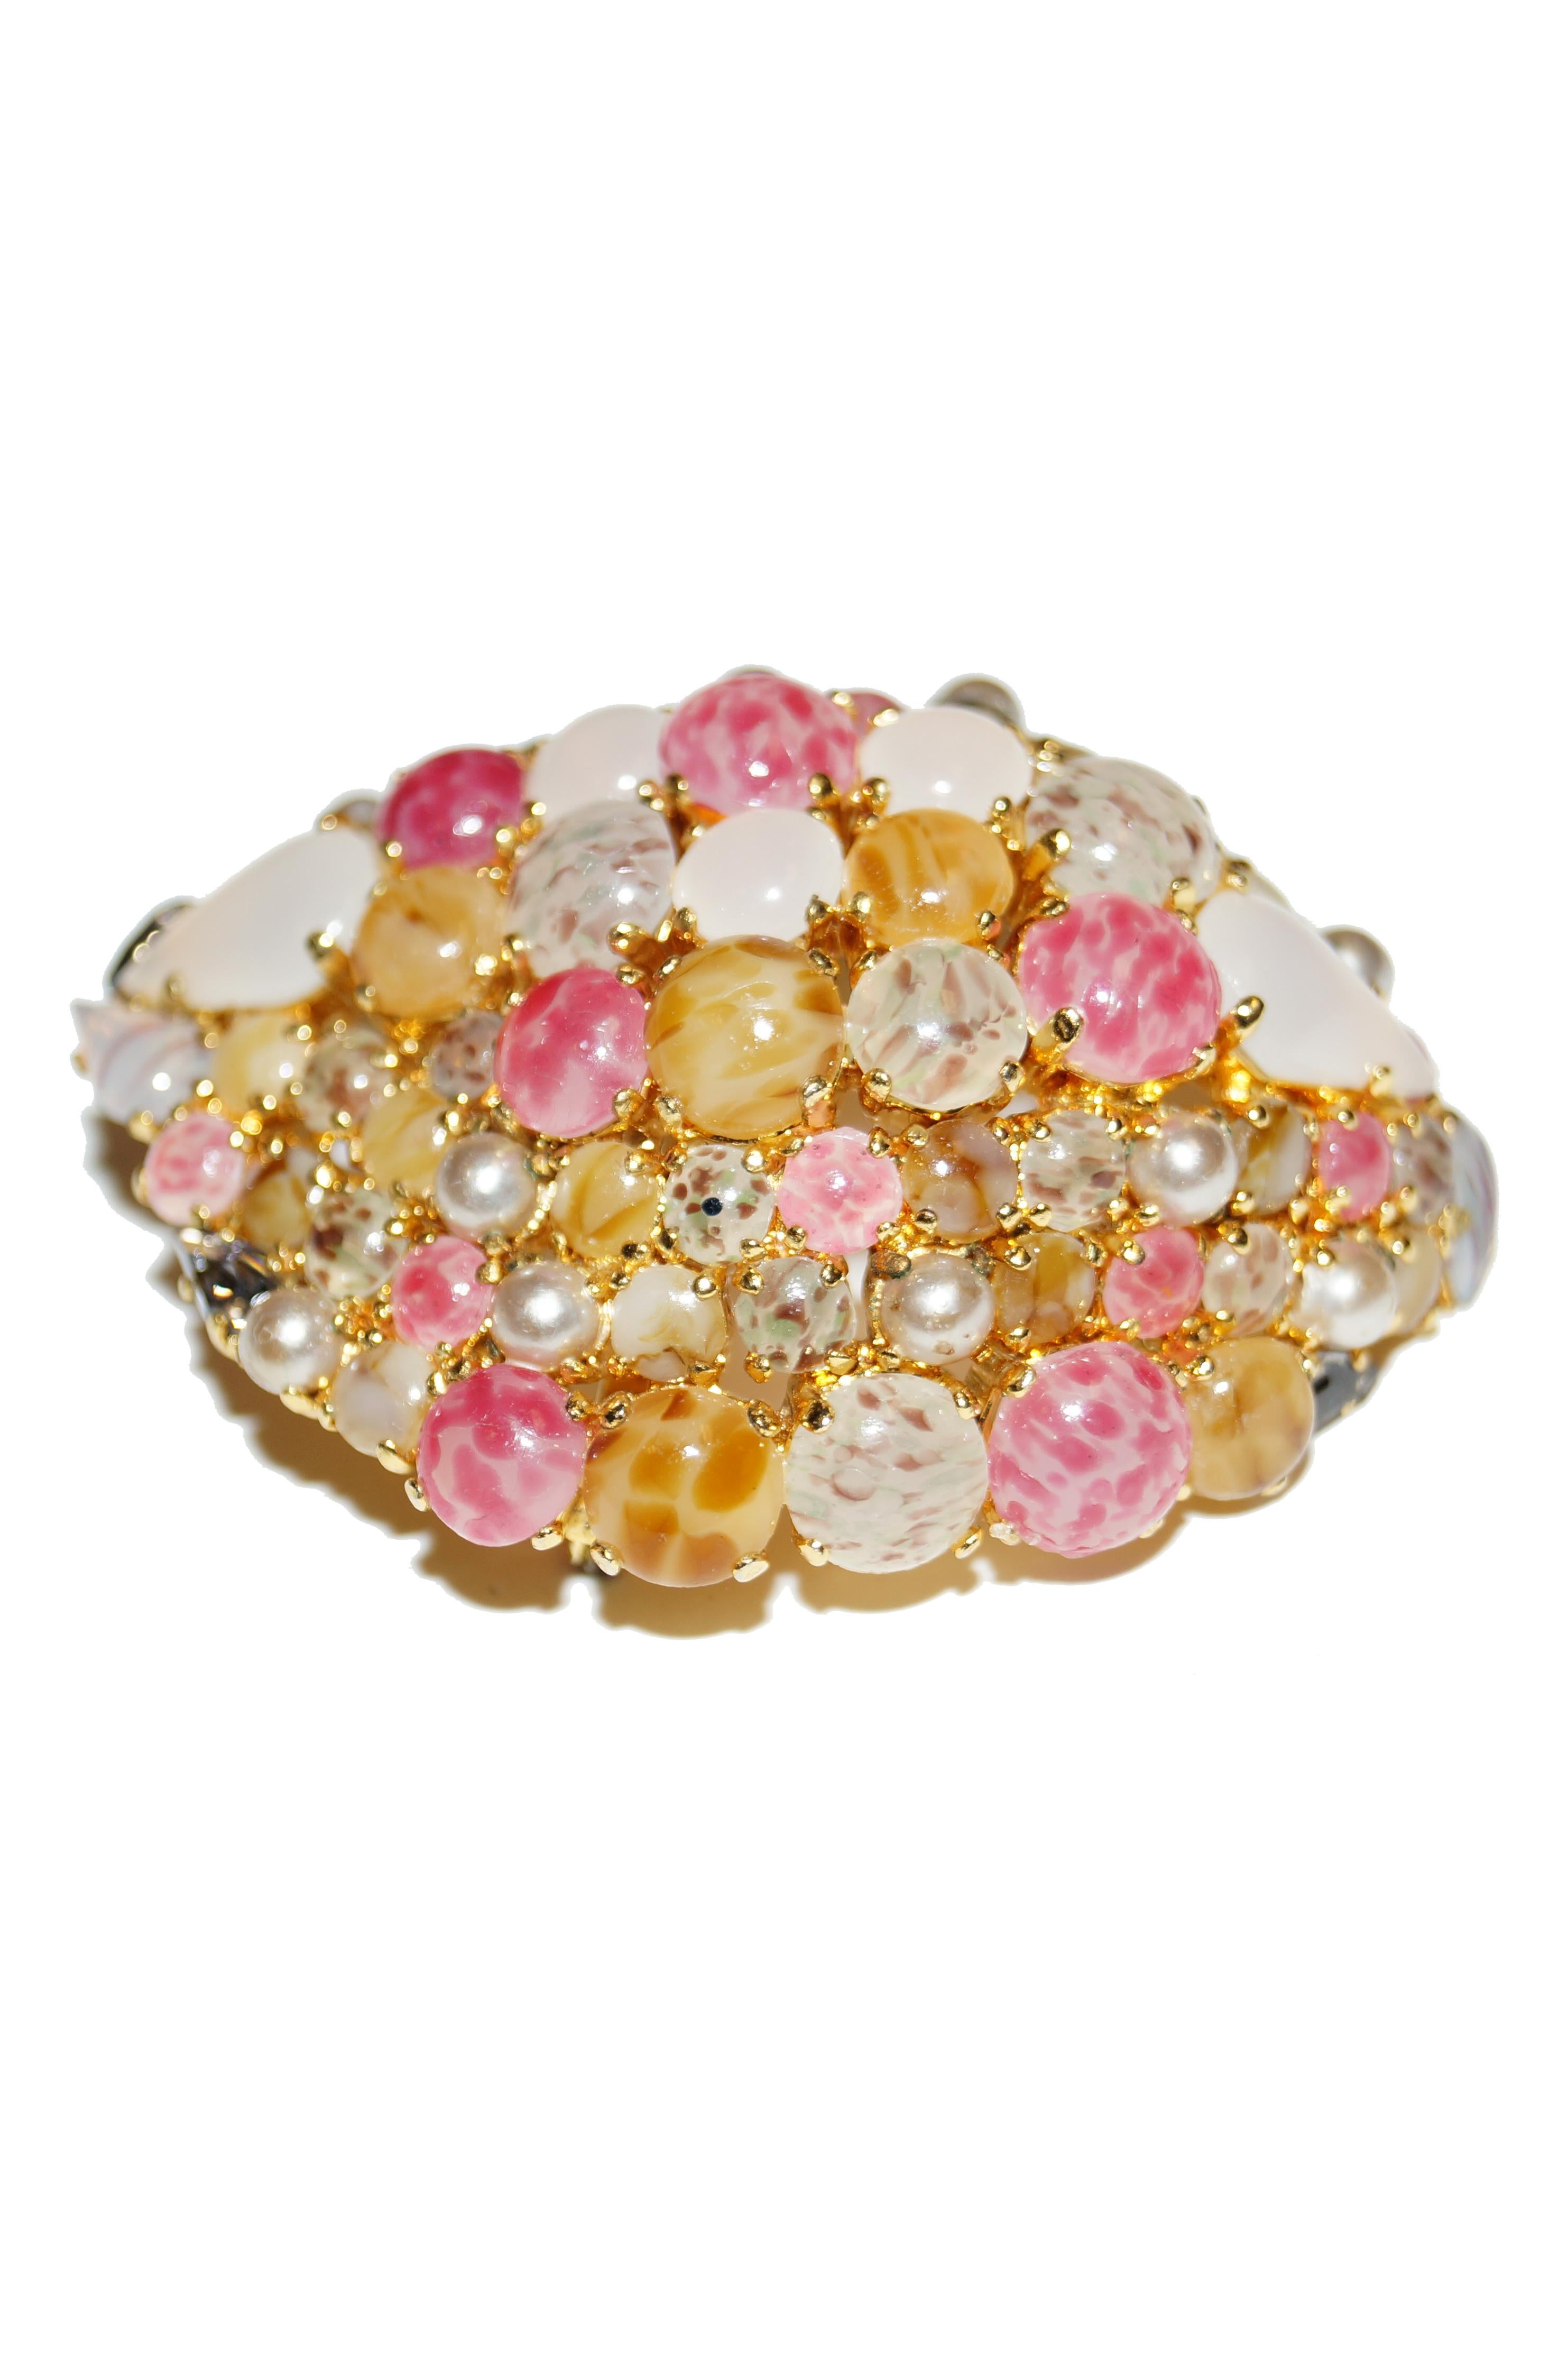 Beautiful, organic arrangement of various circular and tear- drop shaped glass and pearl cabochons in a romantic palette of pinks, golds, and champagne silvers. The brooch is semi - spherical, giving it the appearance of a dazzling pile of jewels!